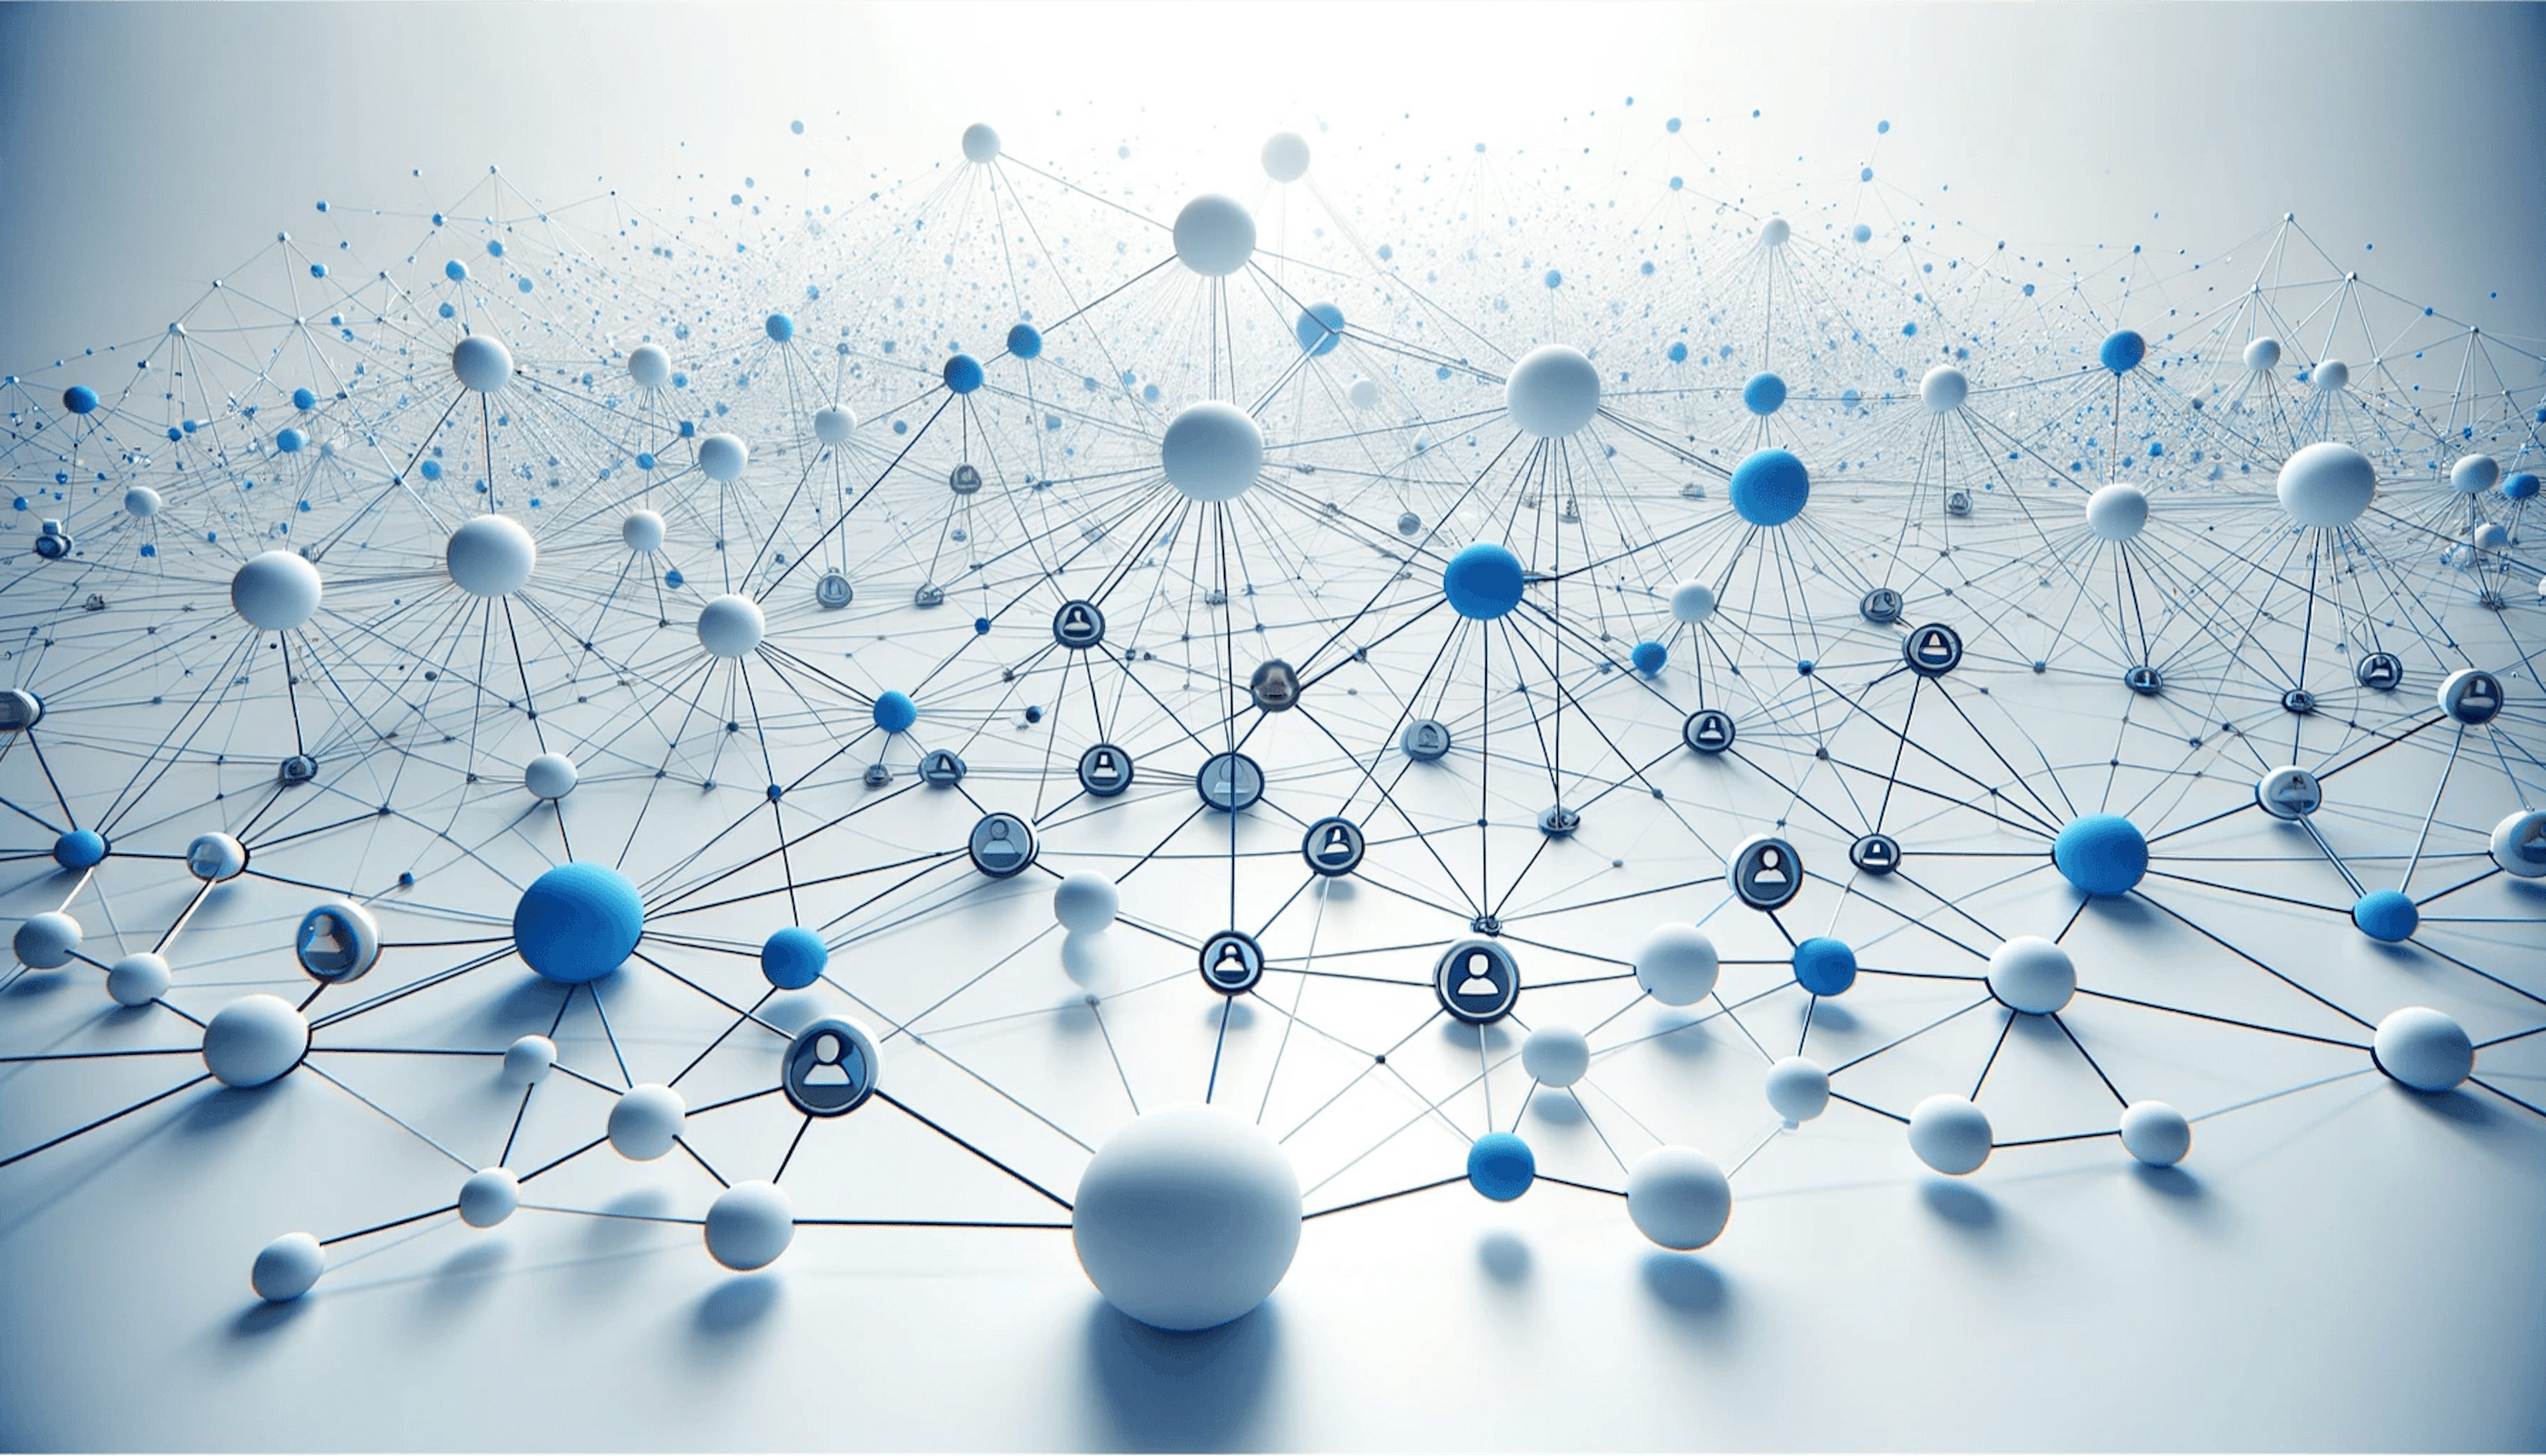 Interconnected network of blue and white spheres with icons of people, representing a social network or digital communication.